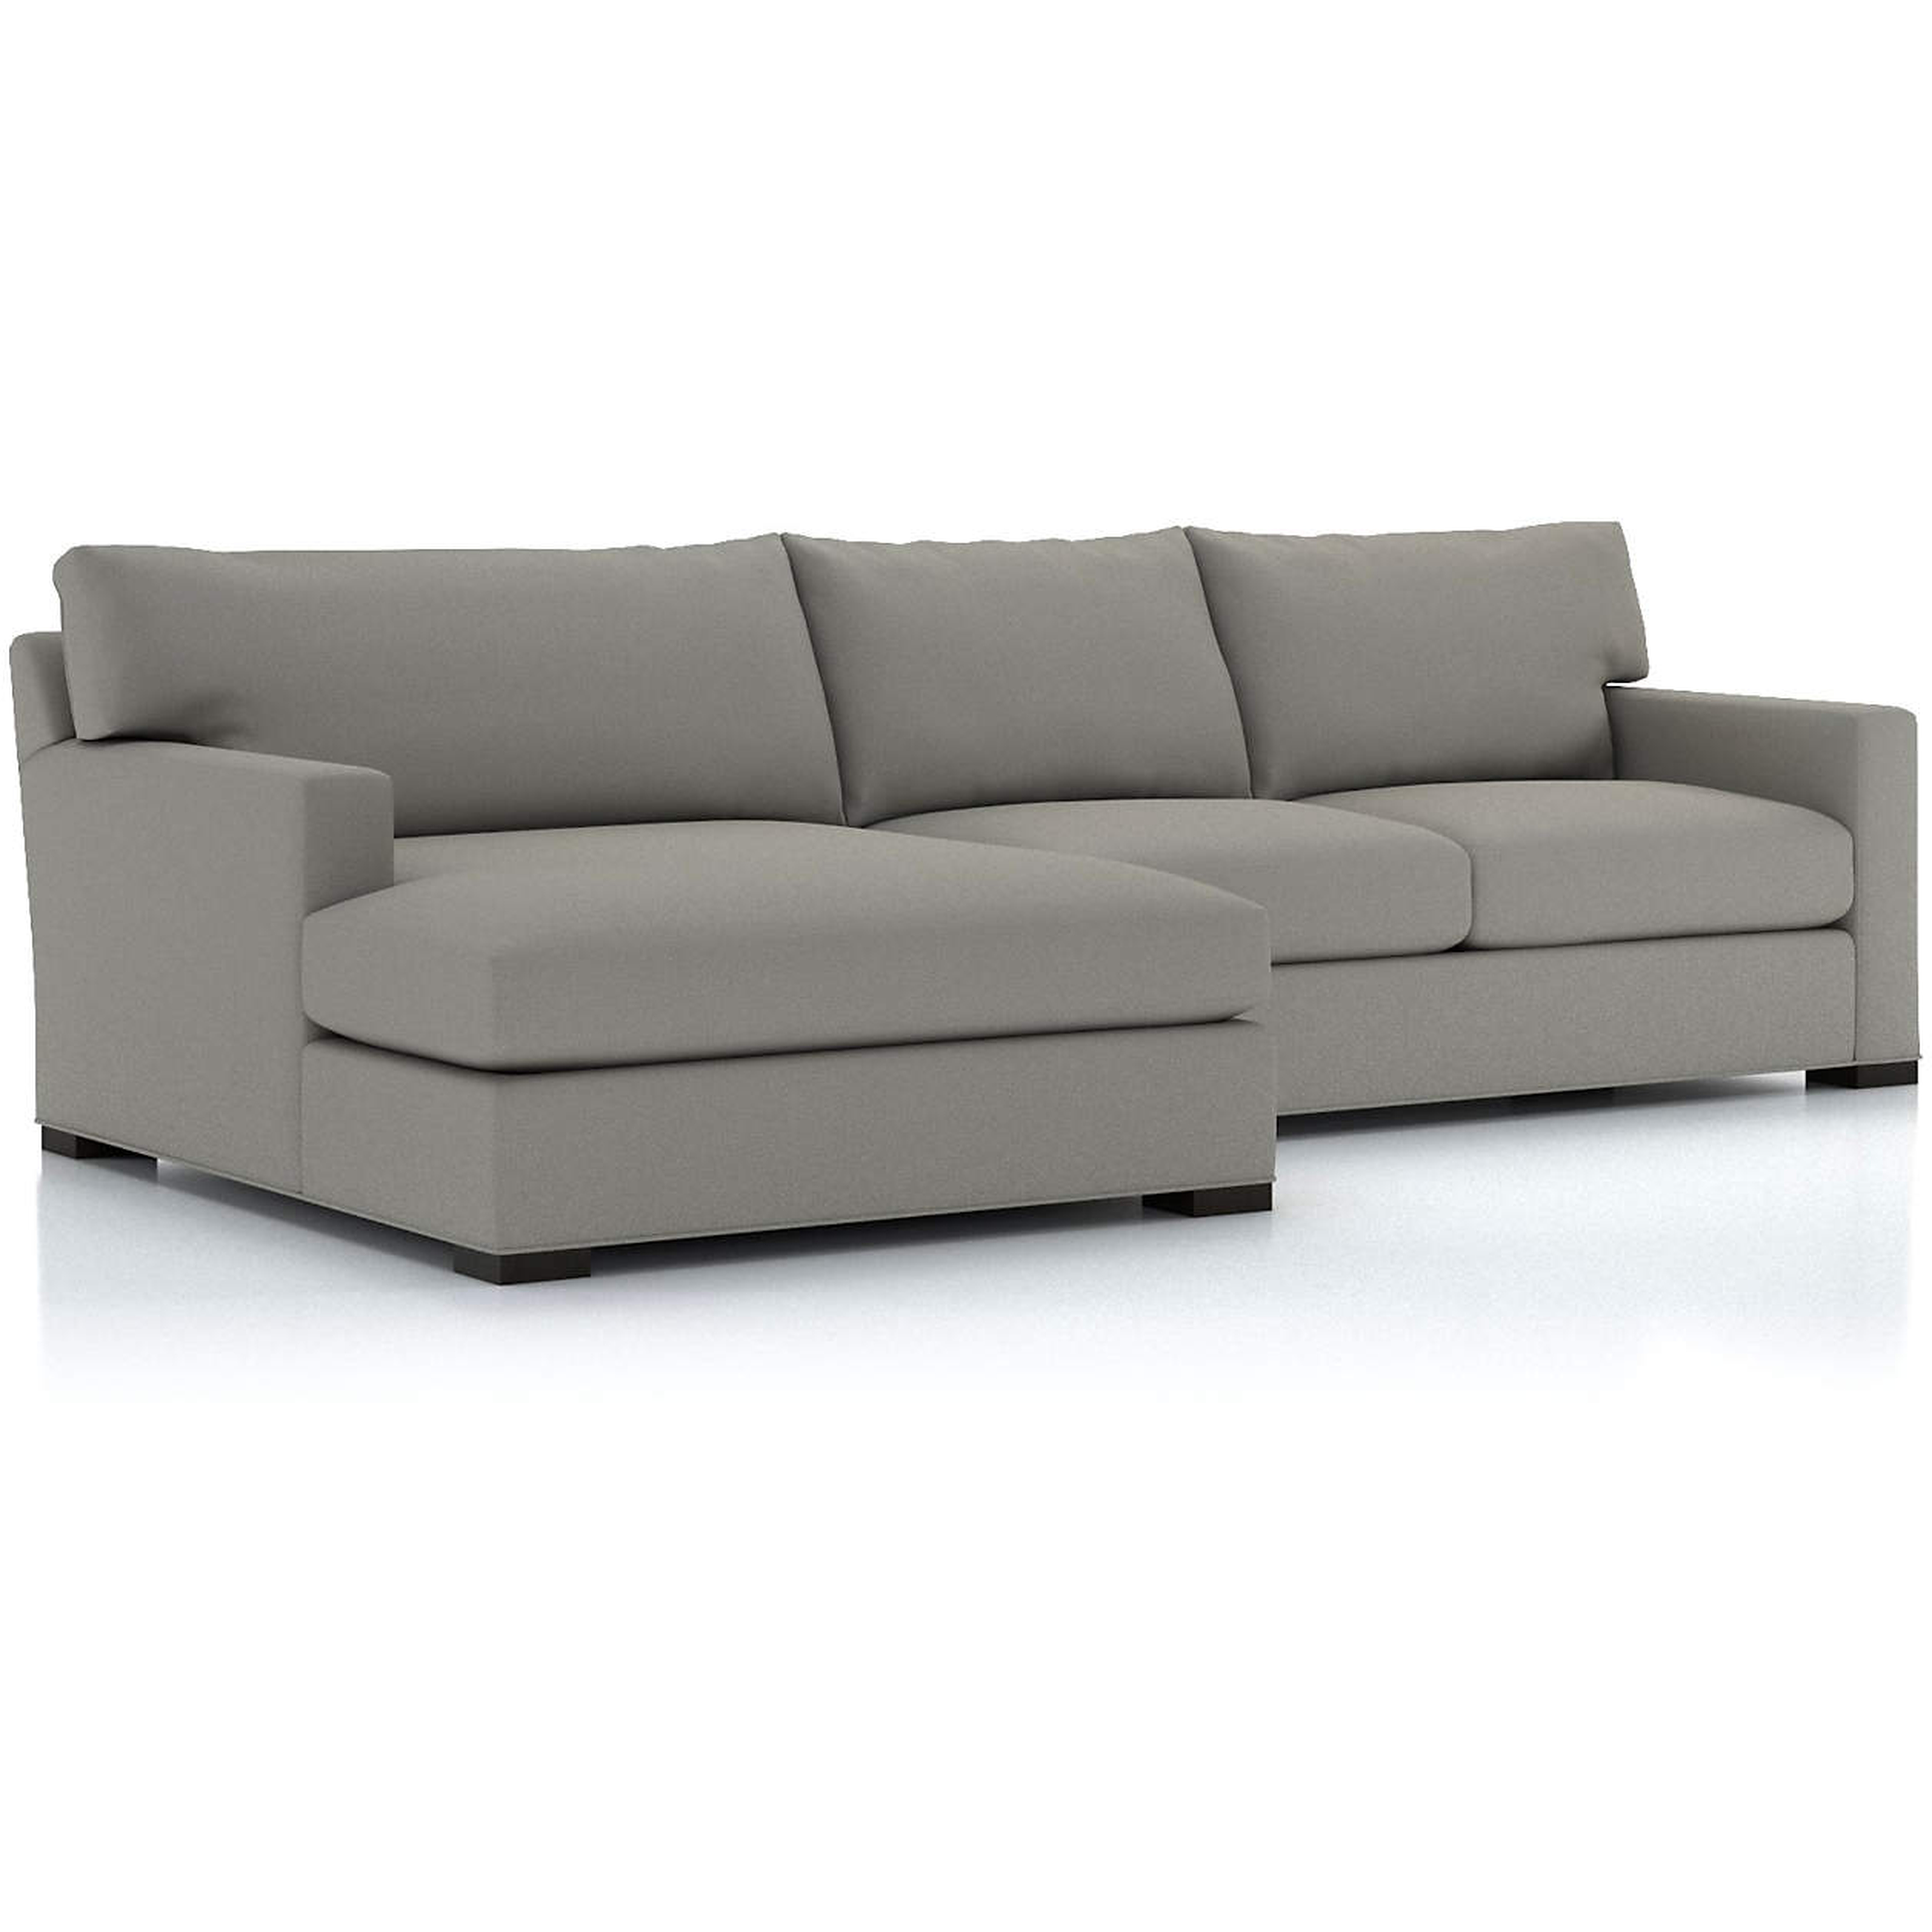 Axis 2-Piece Left Arm Double Chaise Sectional Sofa - Crate and Barrel